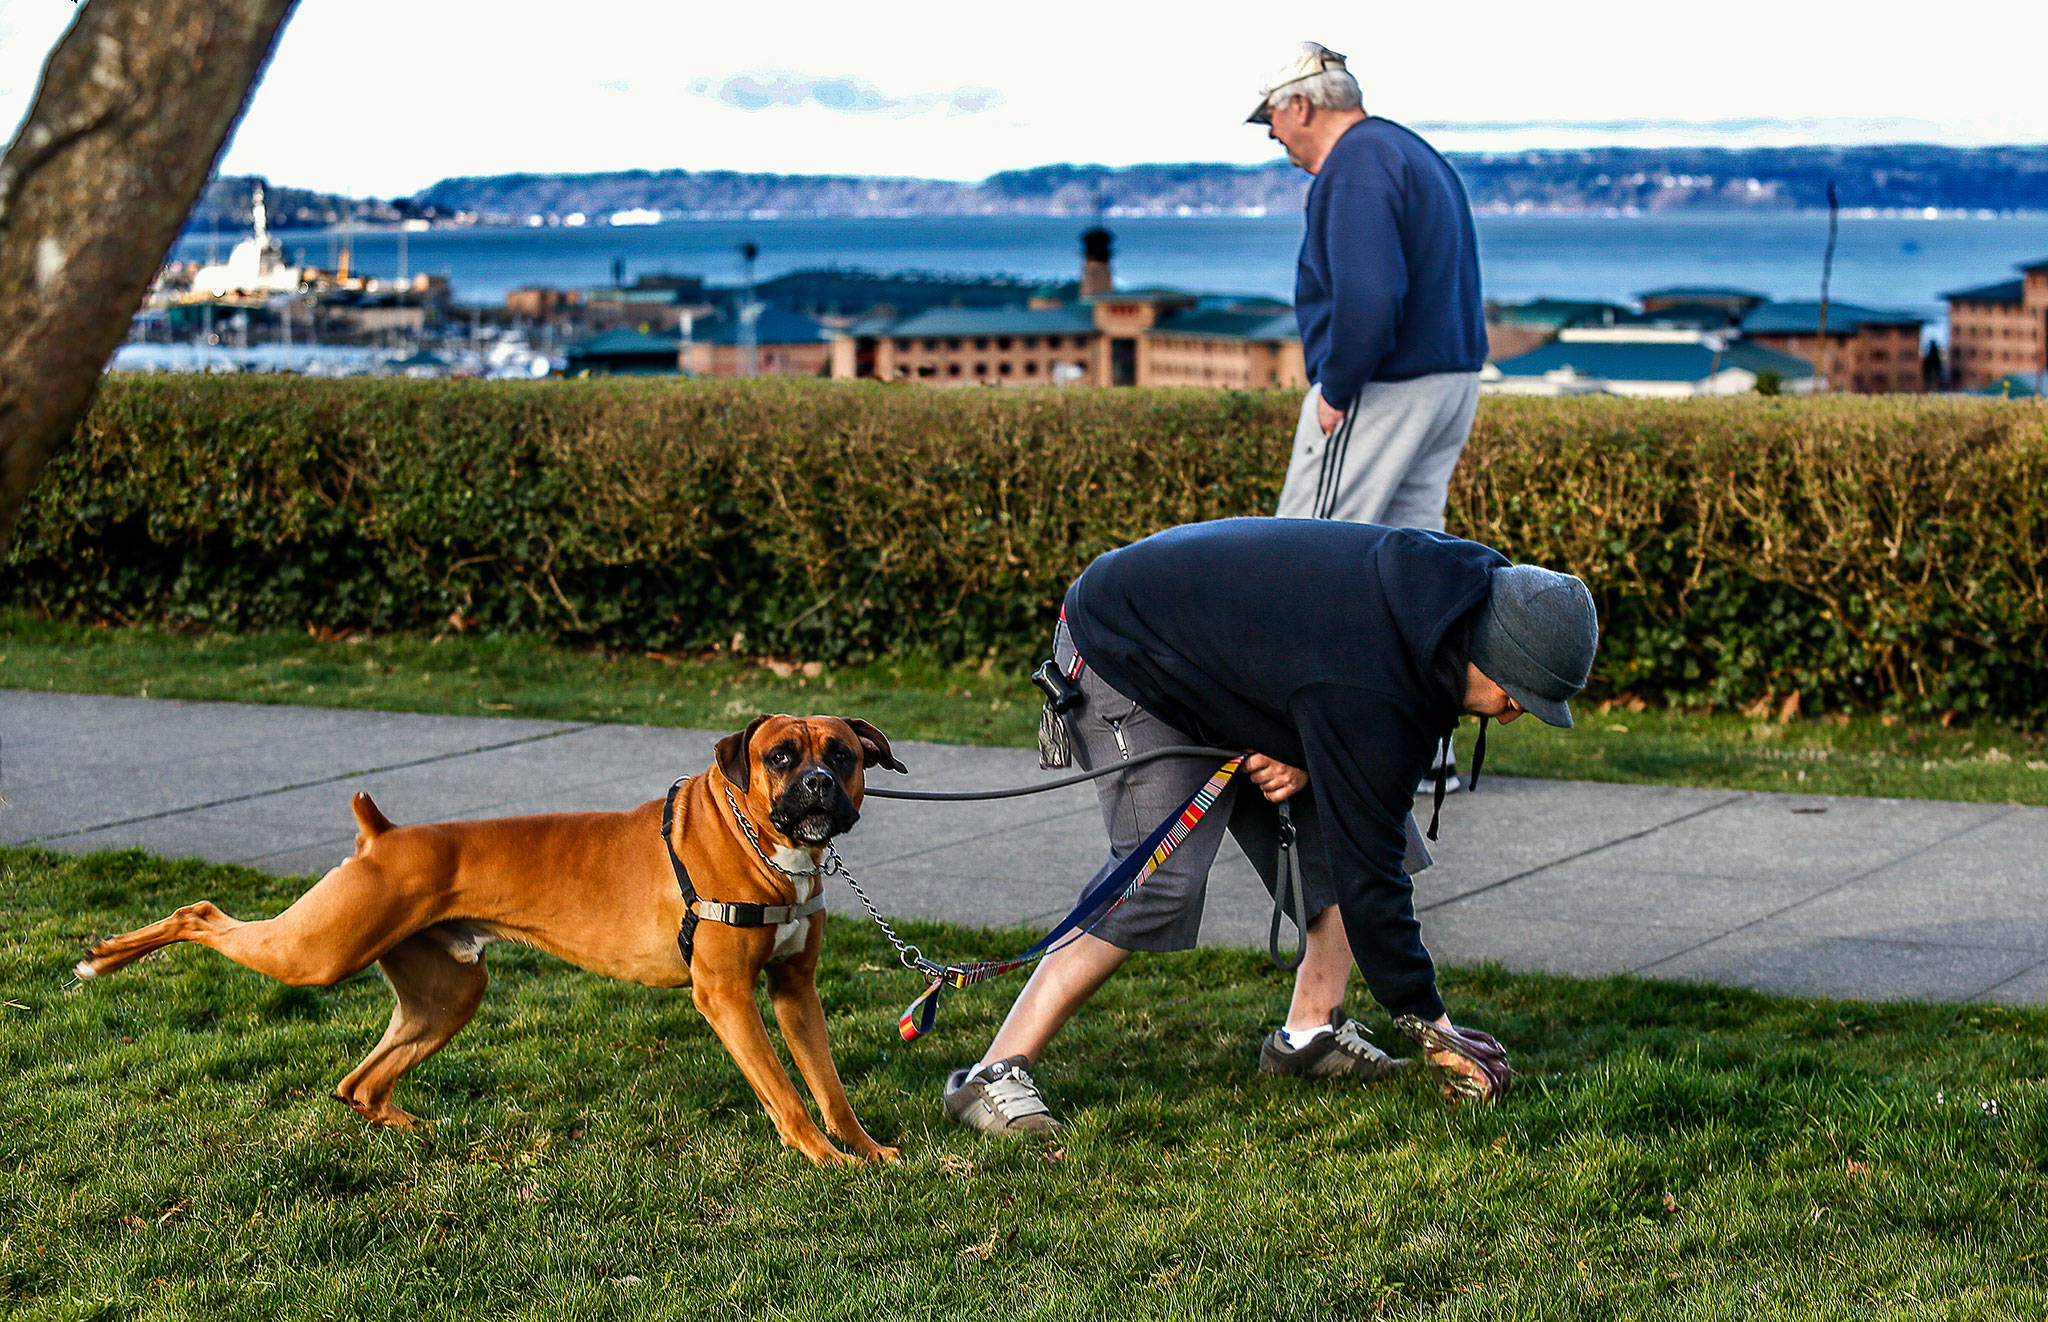 With his hand in a biodegradable bag made for this duty, Nick Garcia of Everett leans over to pick up after Balto, his 4-year-old boxer mix Tuesday morning in Grand Avenue Park. (Dan Bates / The Herald)